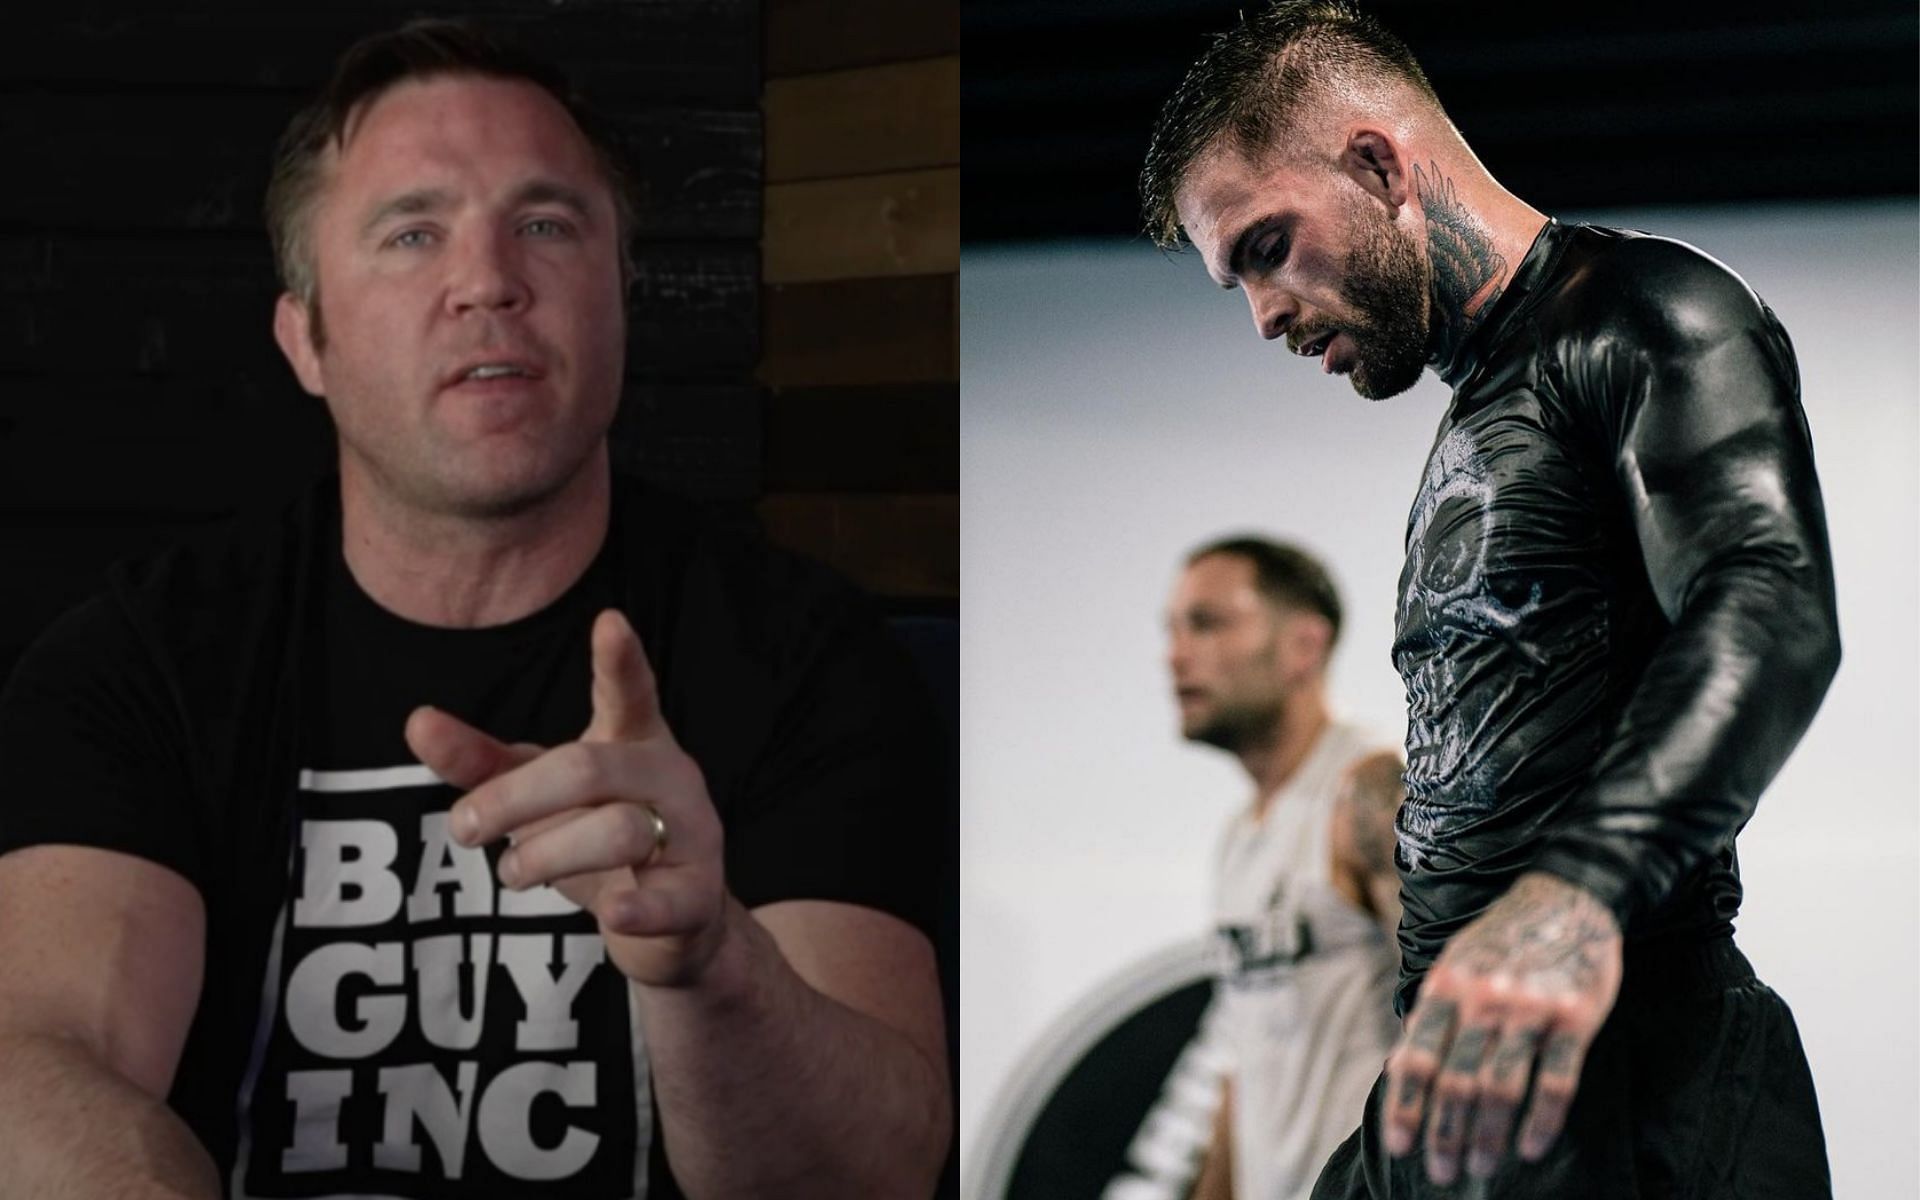 Chael Sonnen (left), Cody Garbrandt (right) [Images courtesy: @sonnench and @cody_nolove via Instagram]